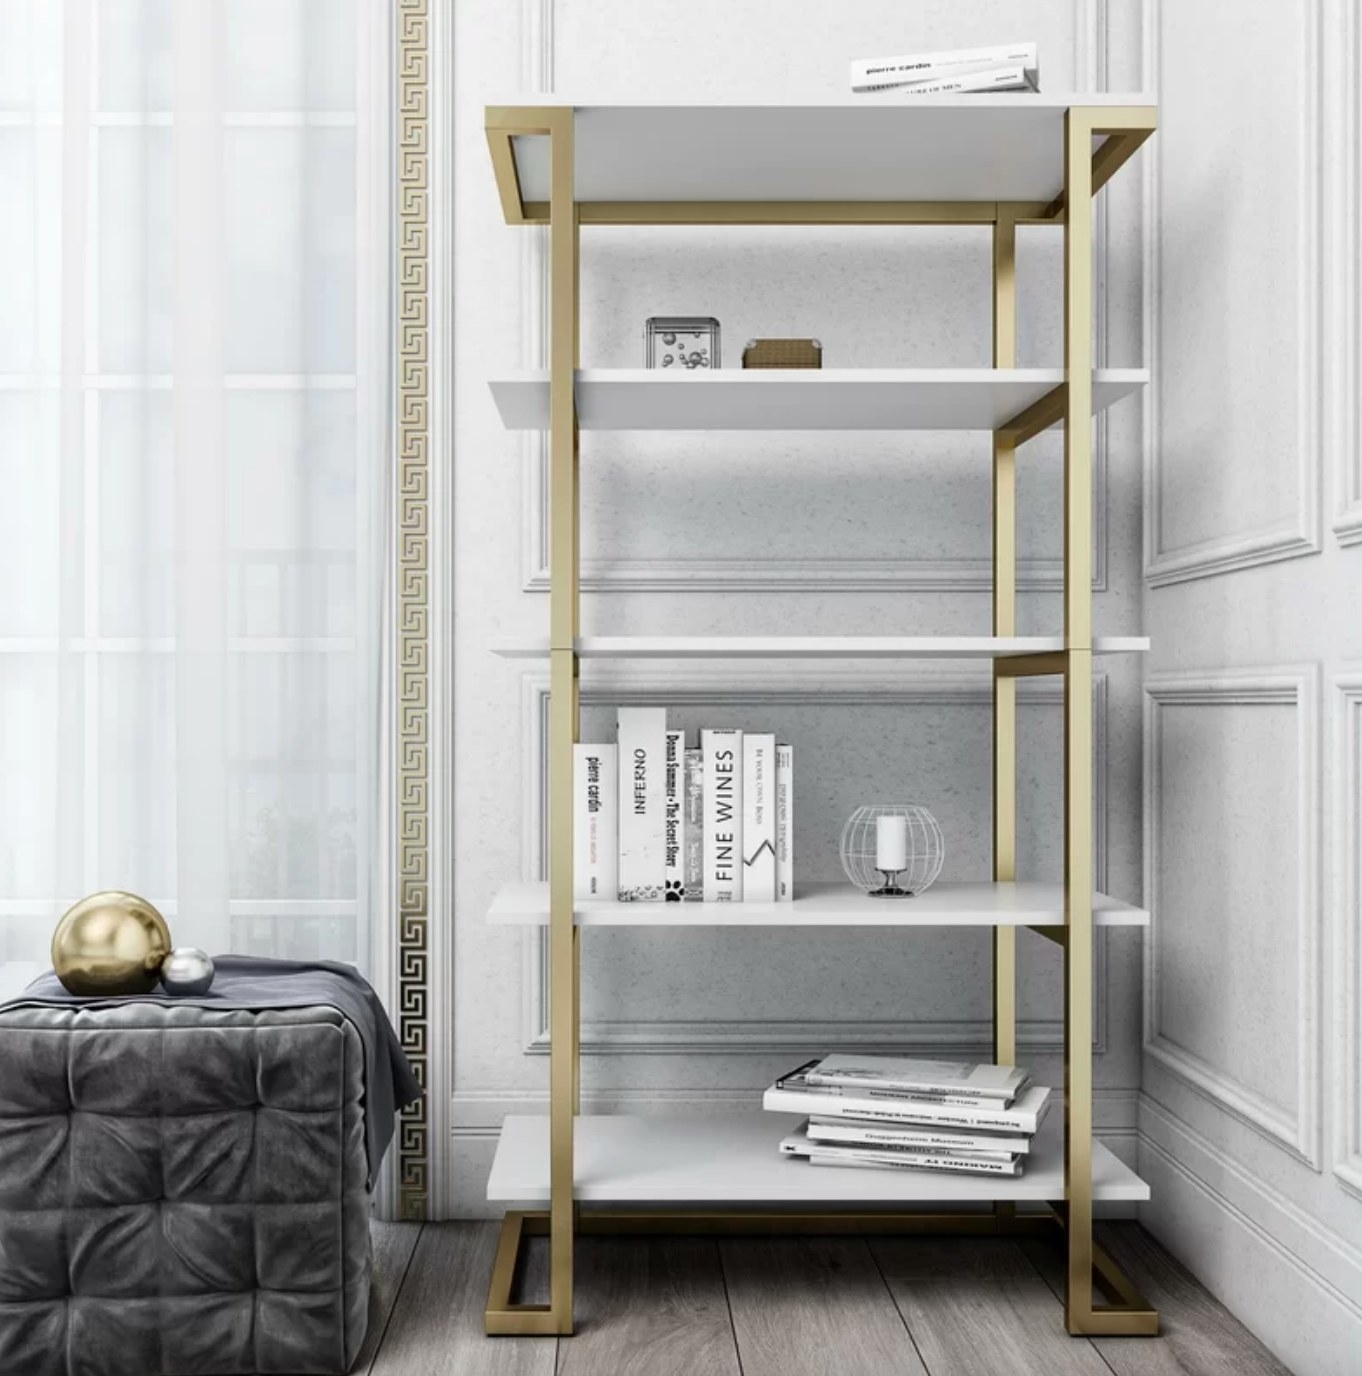 The gold and white bookcase